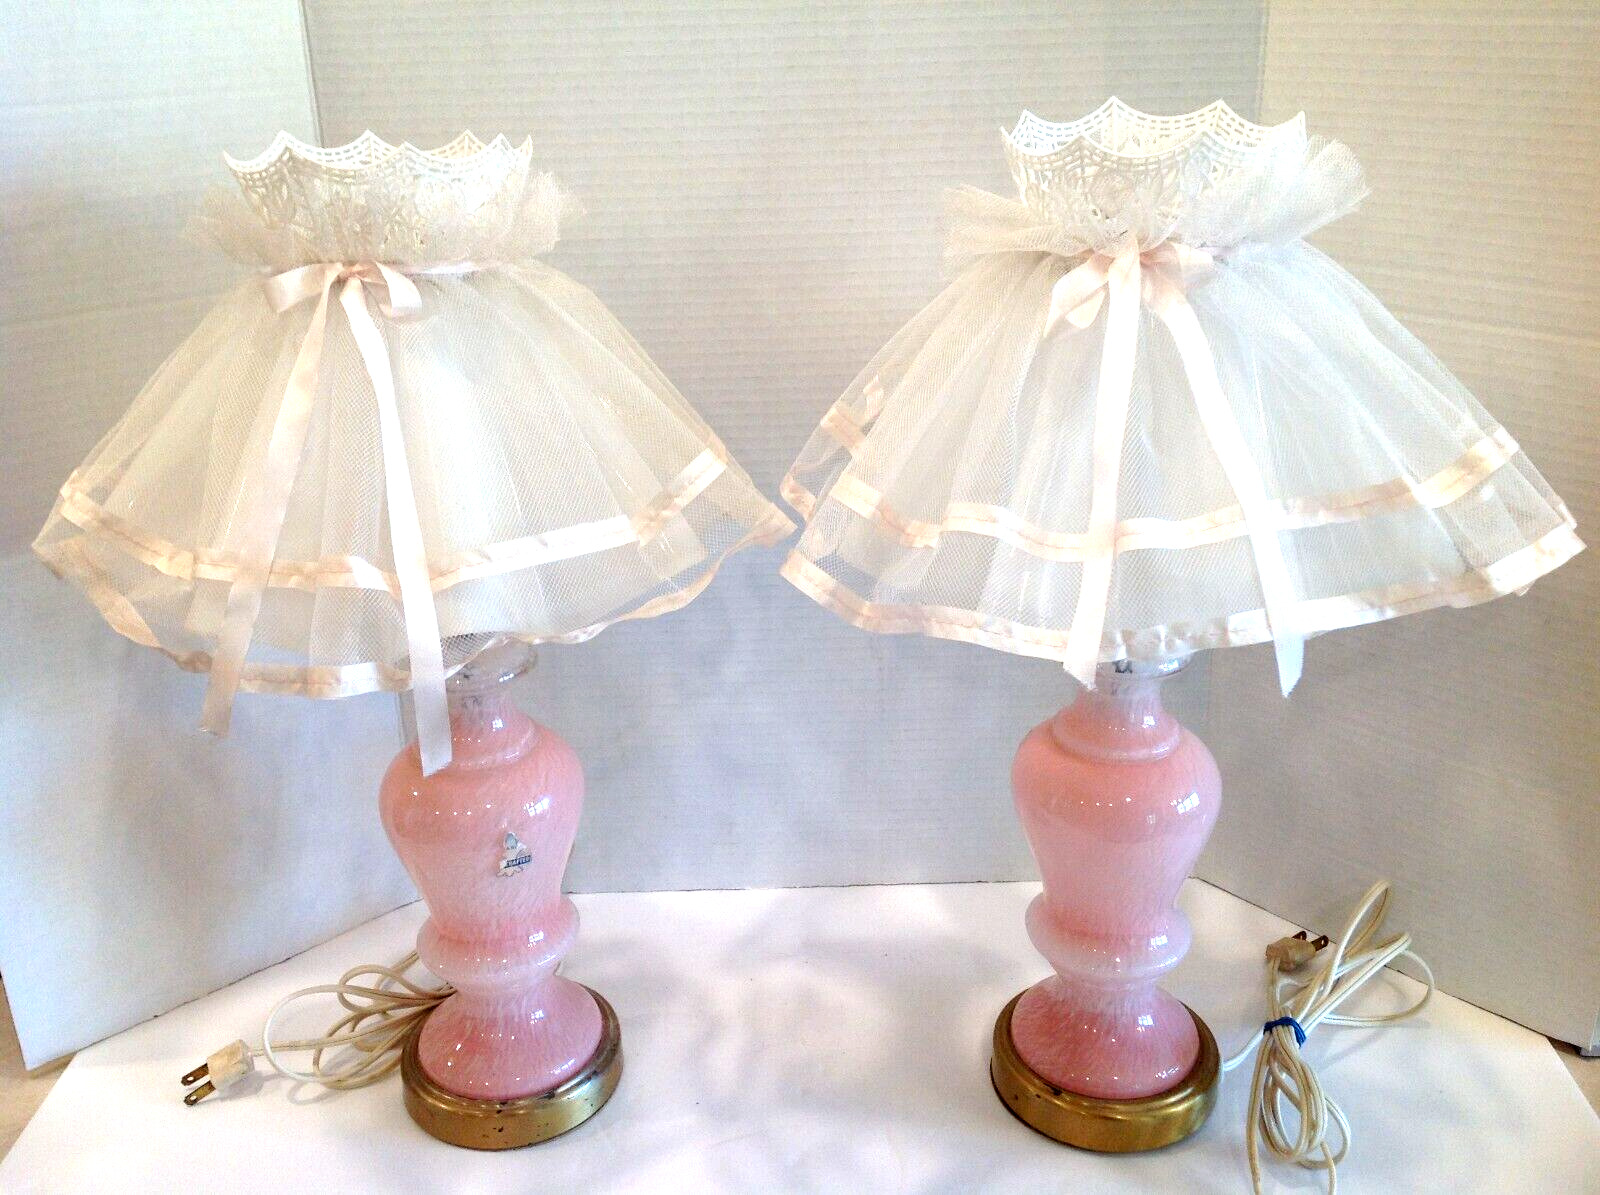 Vintage MCM French Art Glass Mottled Pink Murano Style Lamps with Shades